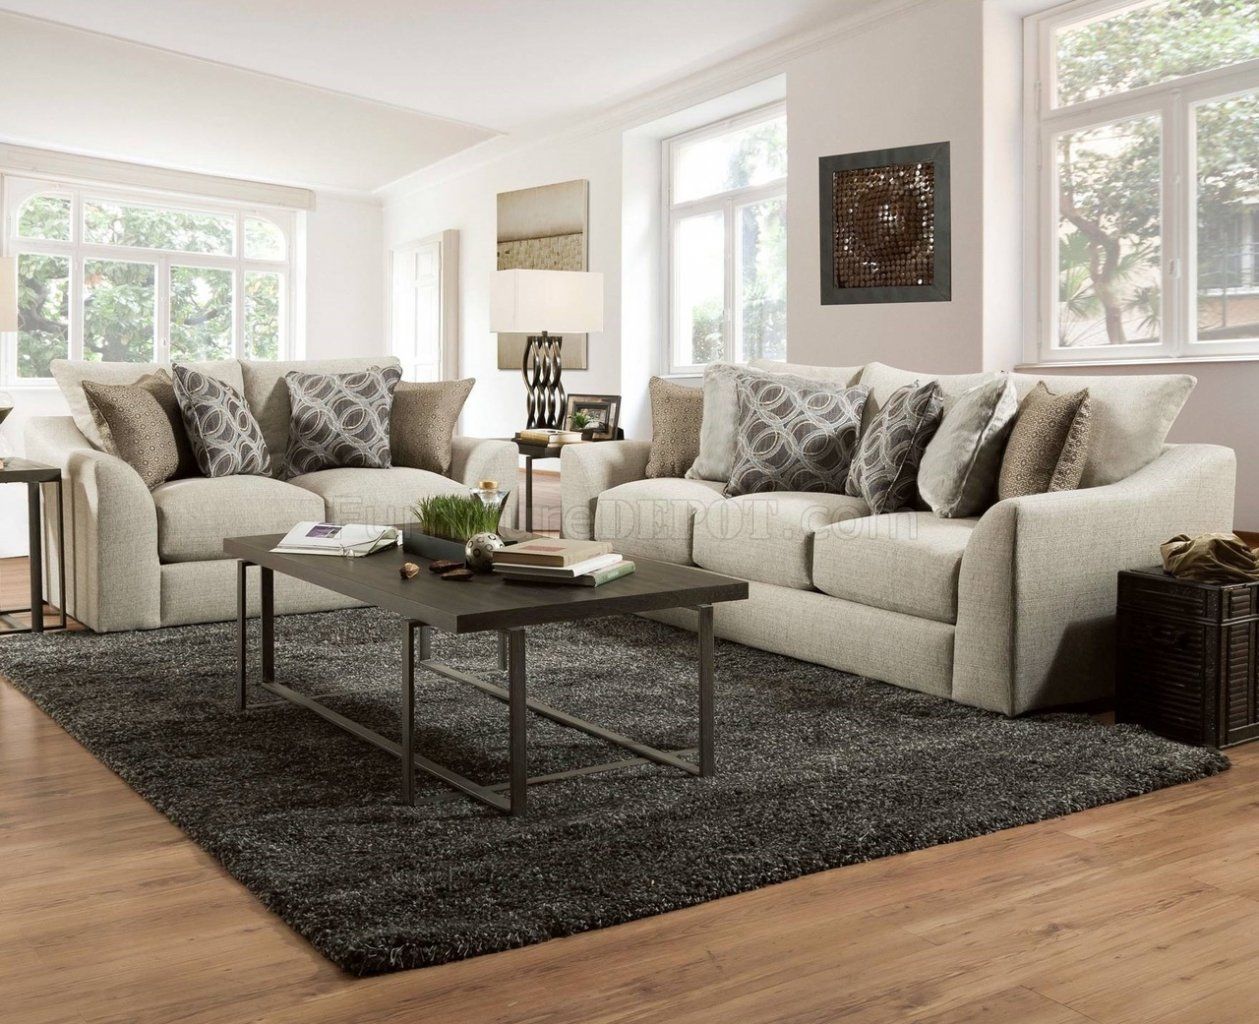 2 Piece Oversized Sofa & Loveseat Set In Espresso Micro Suede With Regard To 110" Oversized Sofas (View 15 of 15)